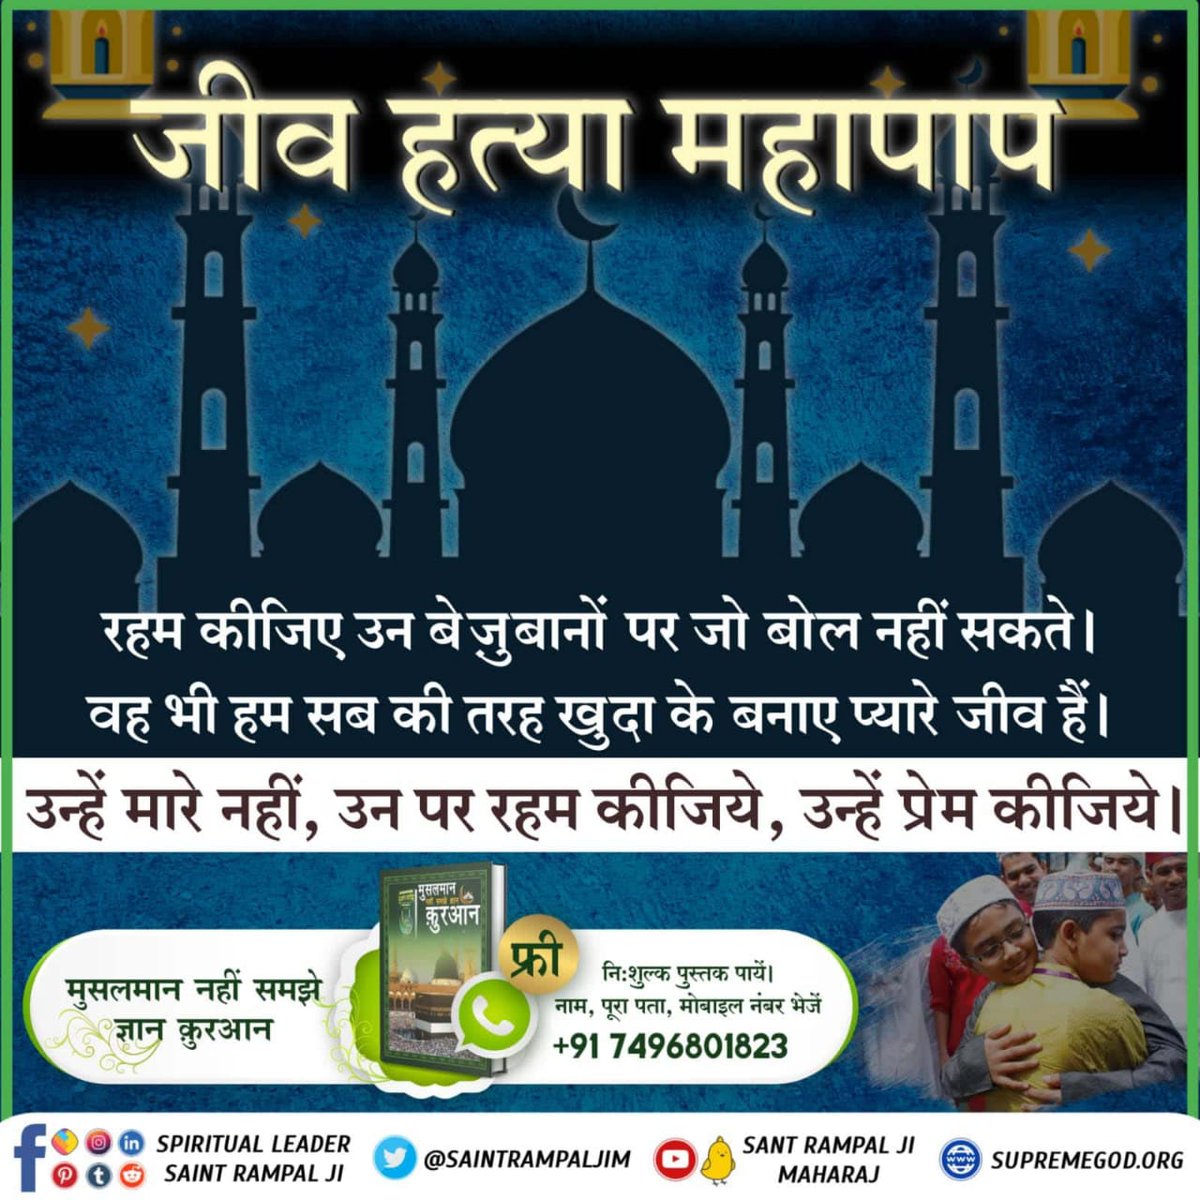 #रहम_करो_मूक_जीवों_पर 
ALLAH KABIR
met Hazrat Muhammad and explained him about the worship of one God and the same was preached by him to his followers. Nabi Muhammad was against killing of animals. That's why Hazrat Muhammad never ate meat nor asked anyone to eat meat.